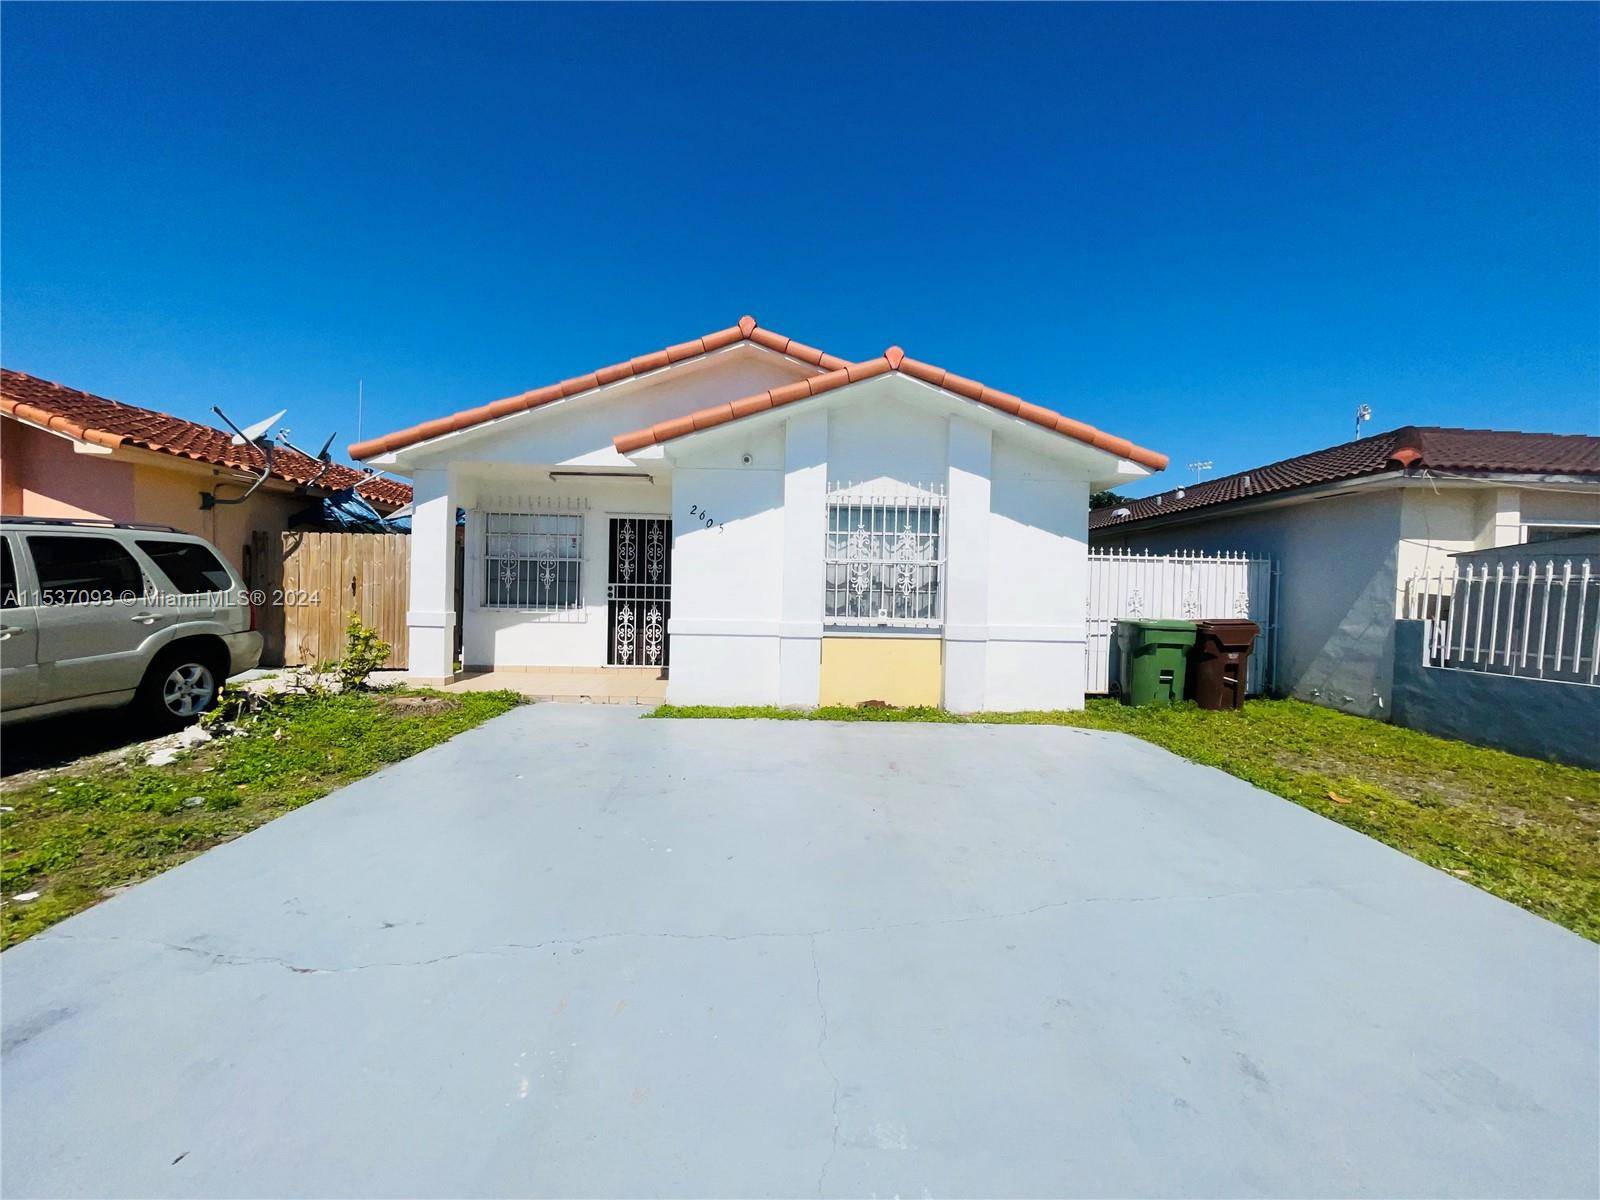 Perfect starting home or investment opportunity, located in central Hialeah near Palmetto Hospital.